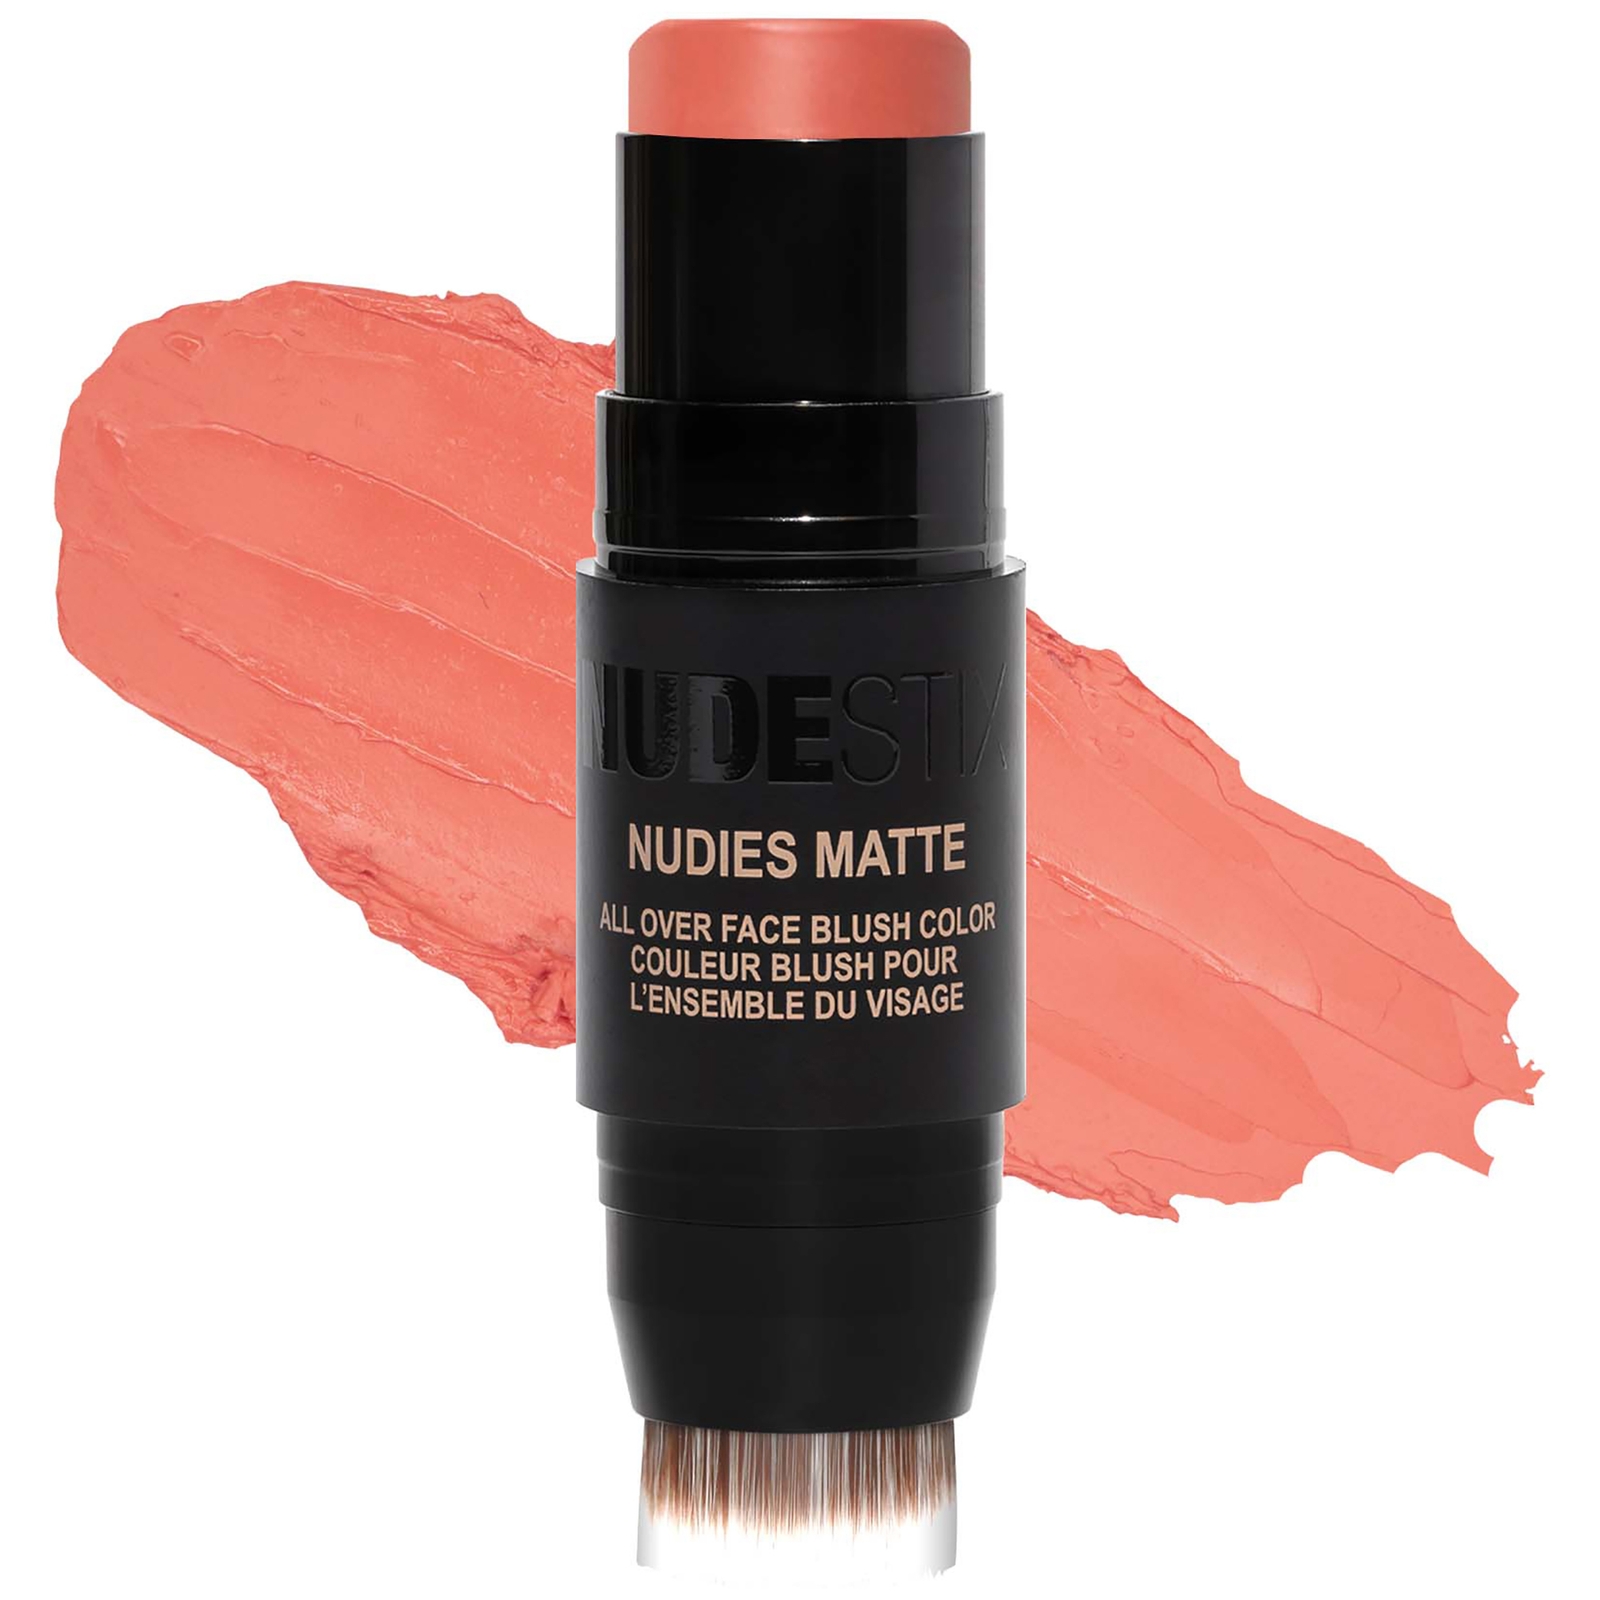 Image of NUDESTIX Nudies Matte All Over Face Blush Colour 7g (Various Shades) - Nude Peach